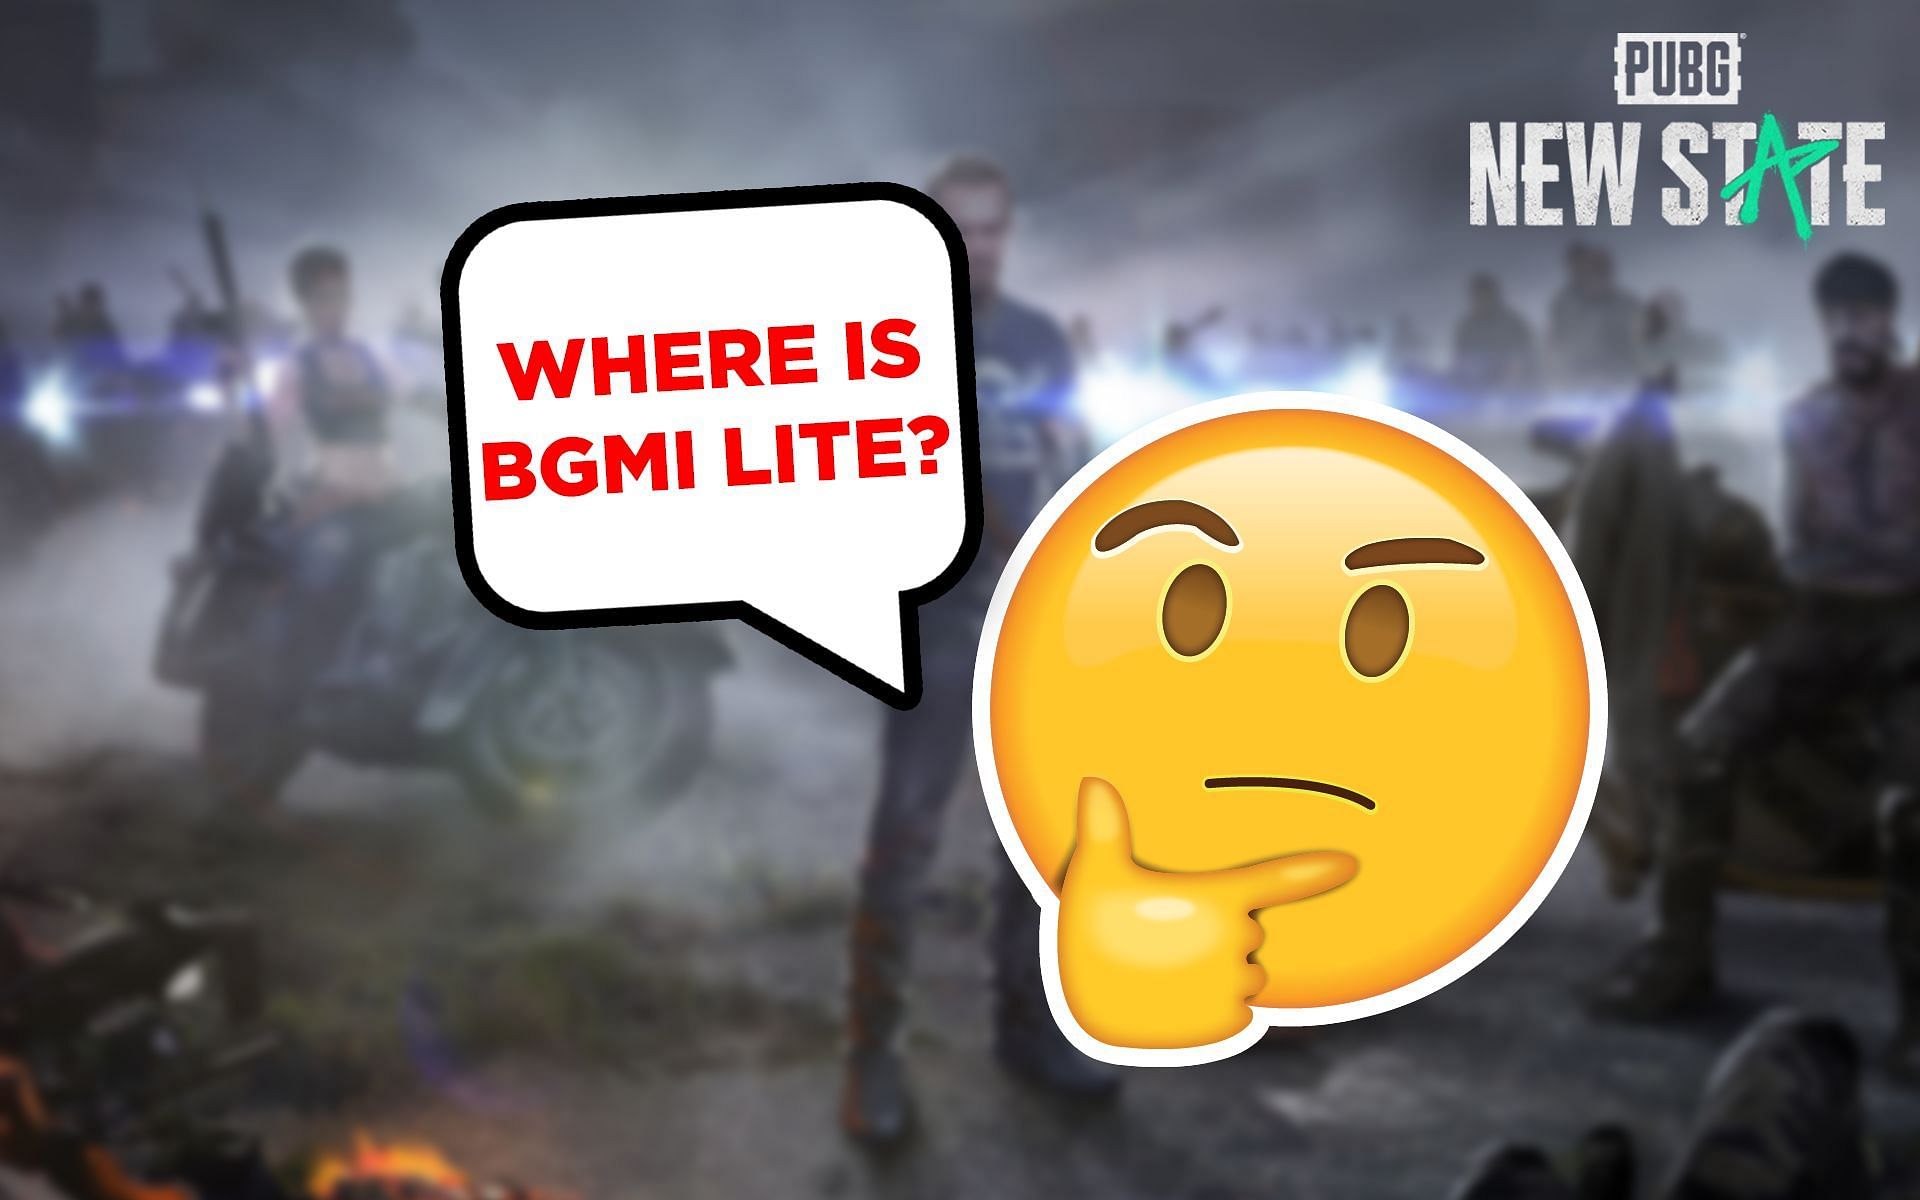 Fans are thinking about BGMI Lite&rsquo;s arrival, even as PUBG New State arrives soon (Image via Sportskeeda)